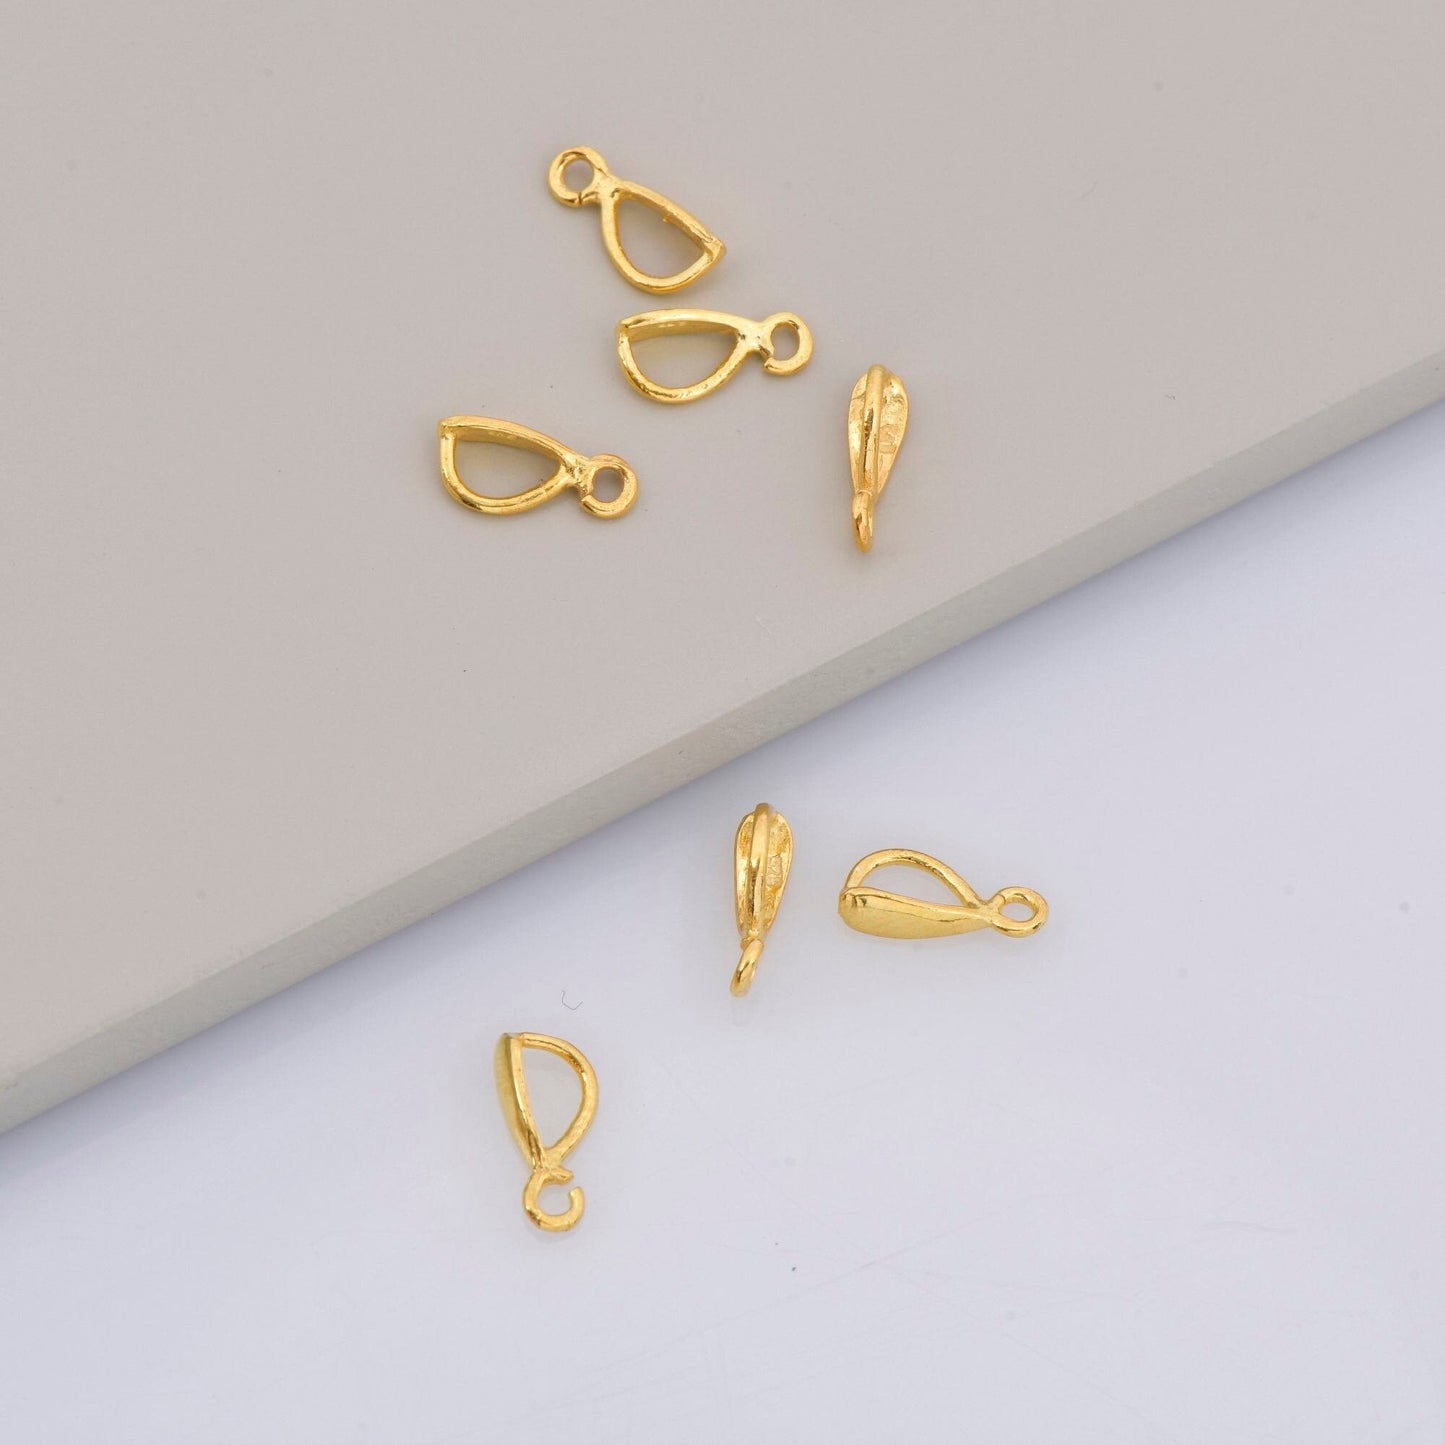 24K Gold Vermeil Bails with Open Loop, 24K Gold Plated Open Loop Bails, Smooth Silver Connector Bails, Bail Charms, Jewelry Findings, M/VM35